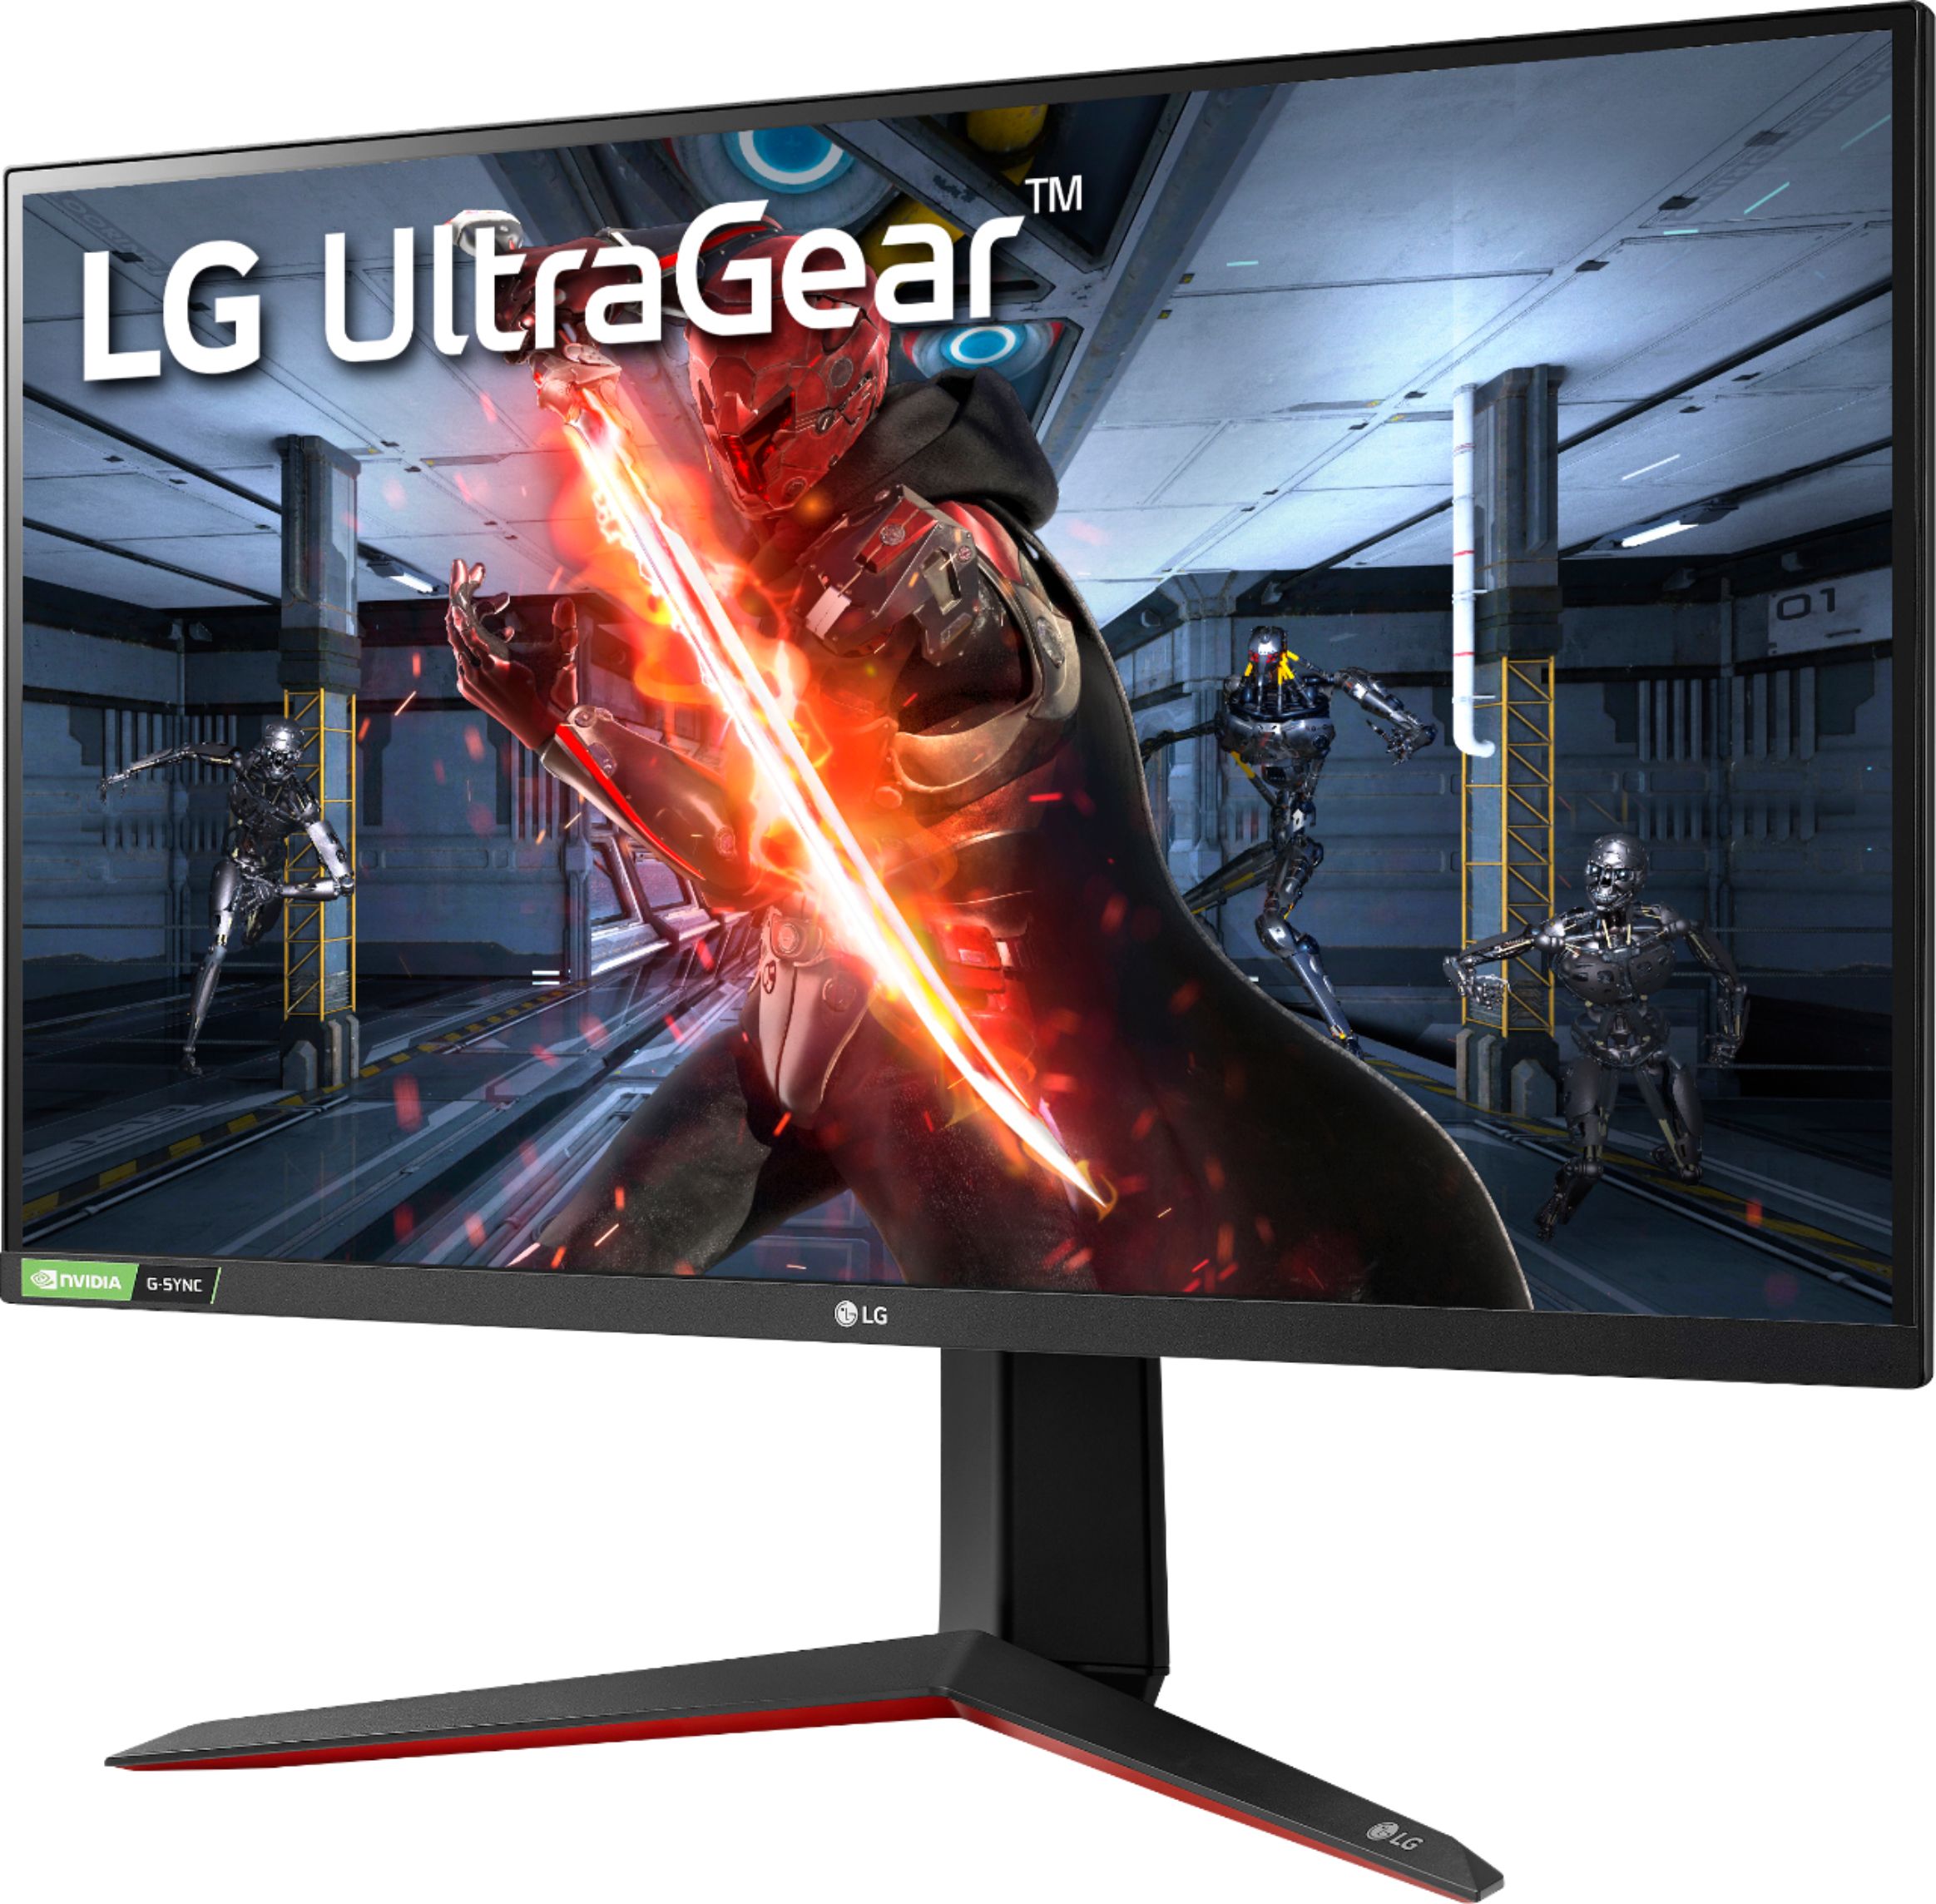 Left View: LG - UltraGear 27" IPS LED QHD FreeSync and G-SYNC Compatible Monitor with HDR (DisplayPort, HDMI) - Black